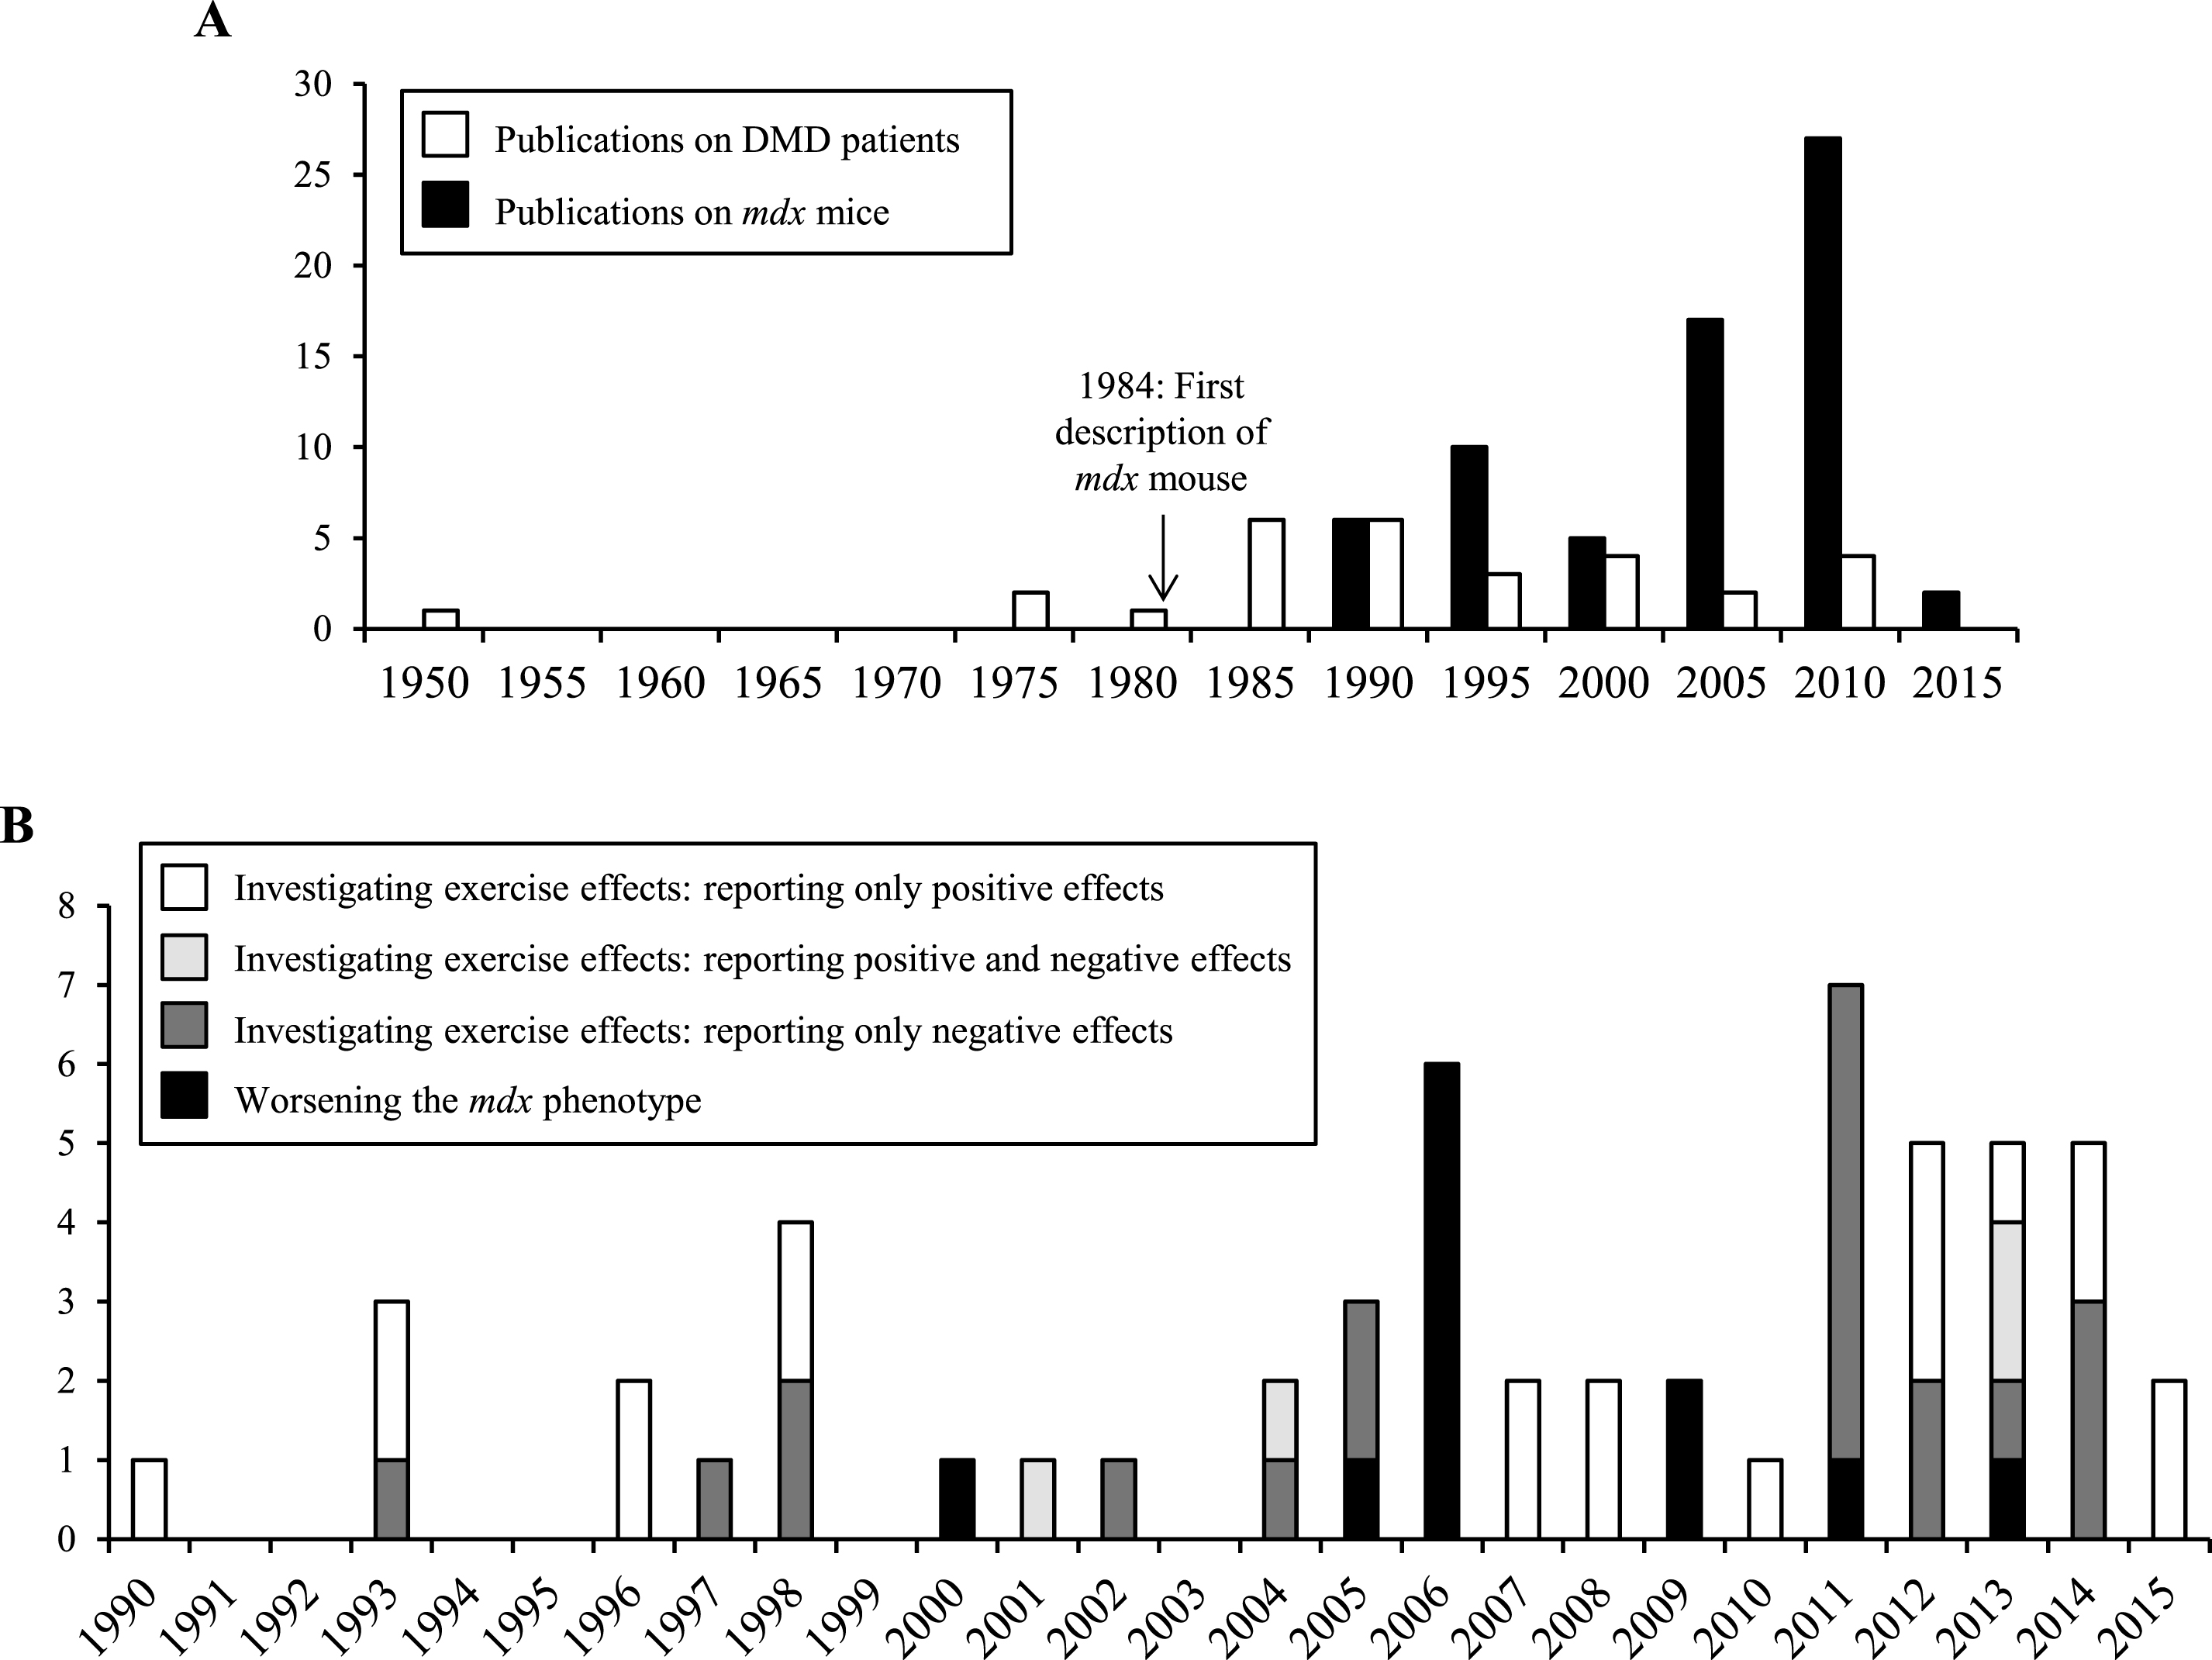 Frequency of publications reporting the effects of physical exercise in mdx mice and DMD patients. (A) Publications describing the effects of physical exercise on mdx mice and DMD patients per 5 years. (B) Publications describing the effects of physical exercise on mdx mice per year, as a function of research objective.